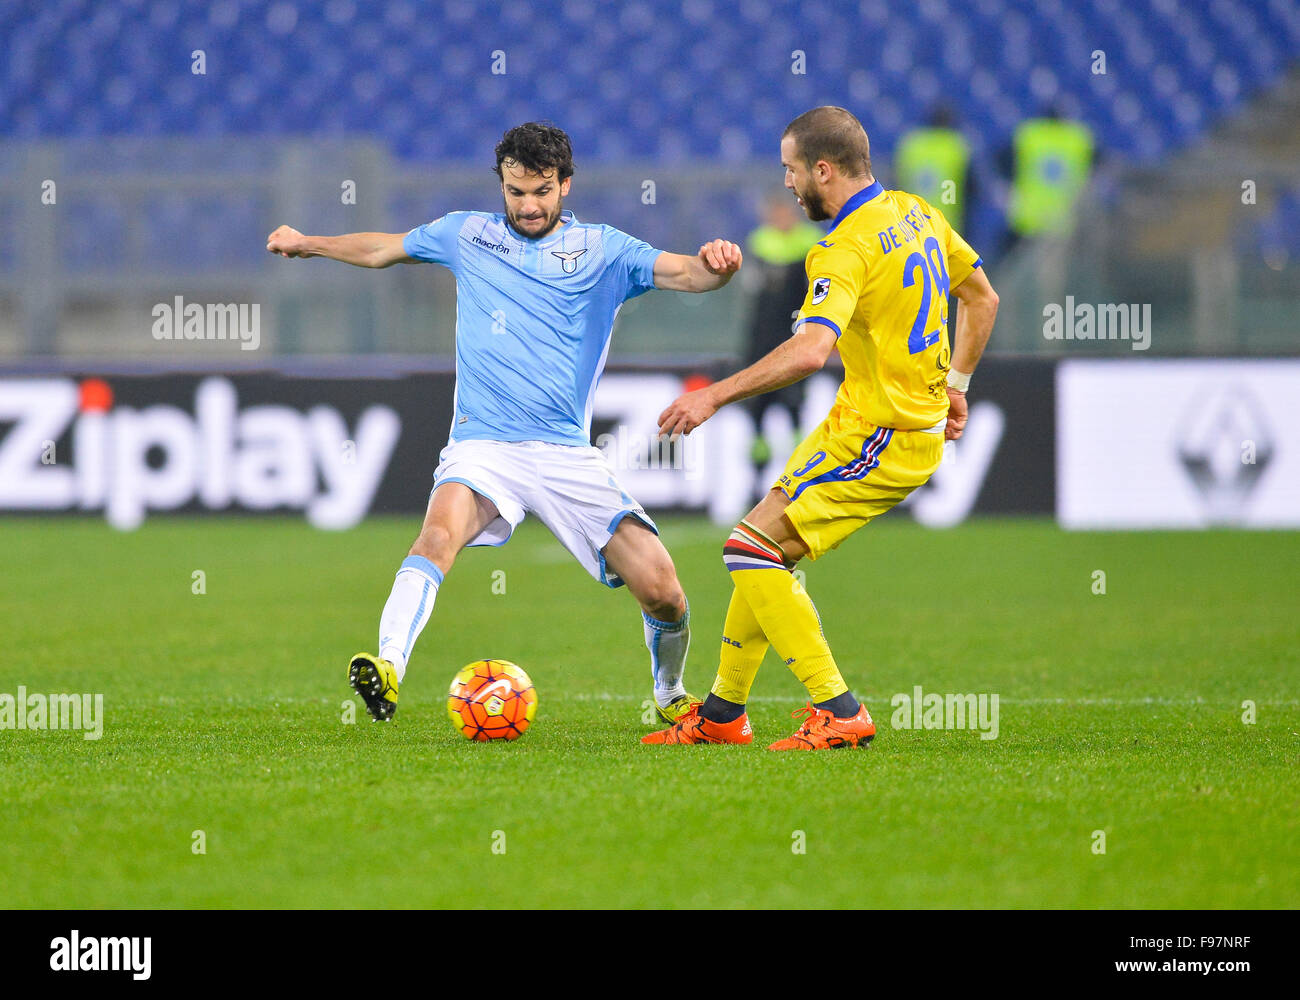 Rome, Italy. 14th December, 2015. Marco Parolo fights for the ball with Lorenzo De Silvestri during the Italian Serie A football match S.S. Lazio vs U.C. Sampdoria at the Olympic Stadium in Rome, on December 14, 2015. Stock Photo